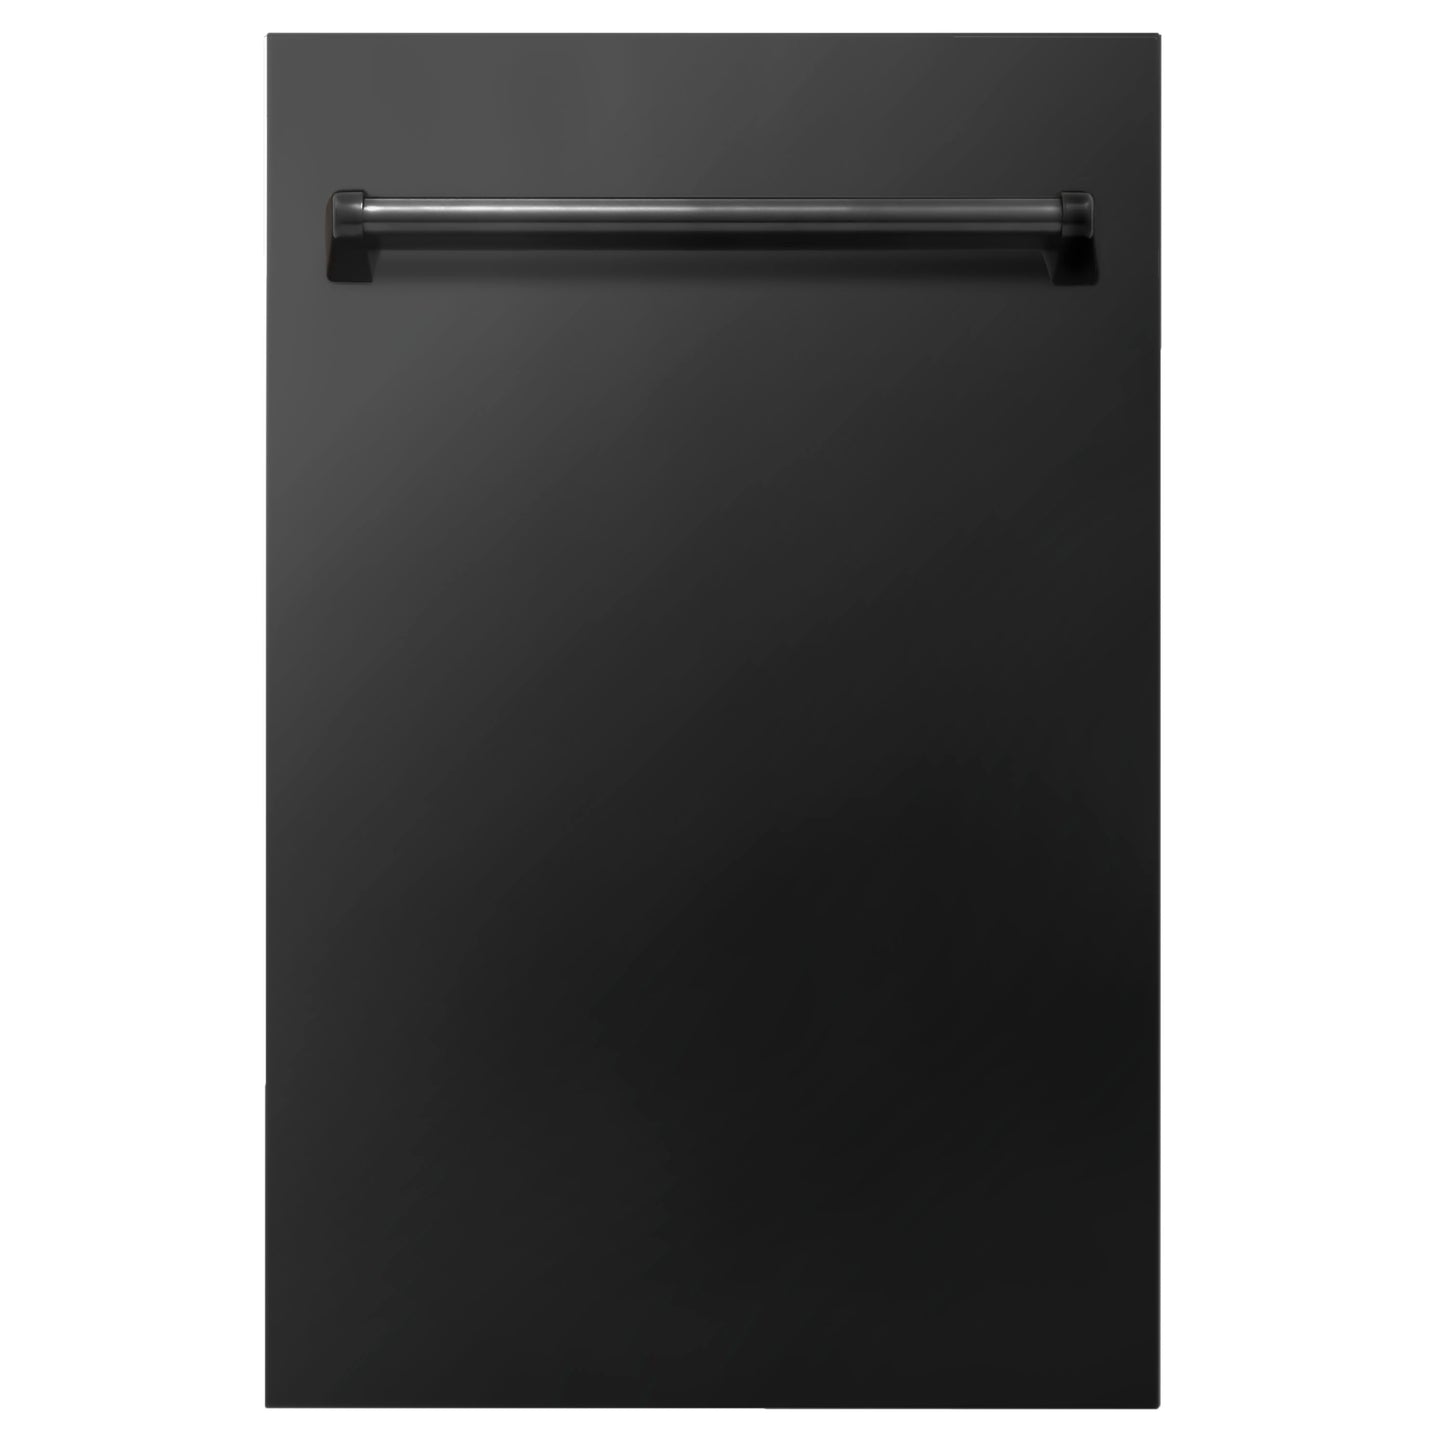 ZLINE 18 in. Compact Top Control Dishwasher with Black Stainless Steel Panel and Traditional Handle, 52dBa (DW-BS-18)